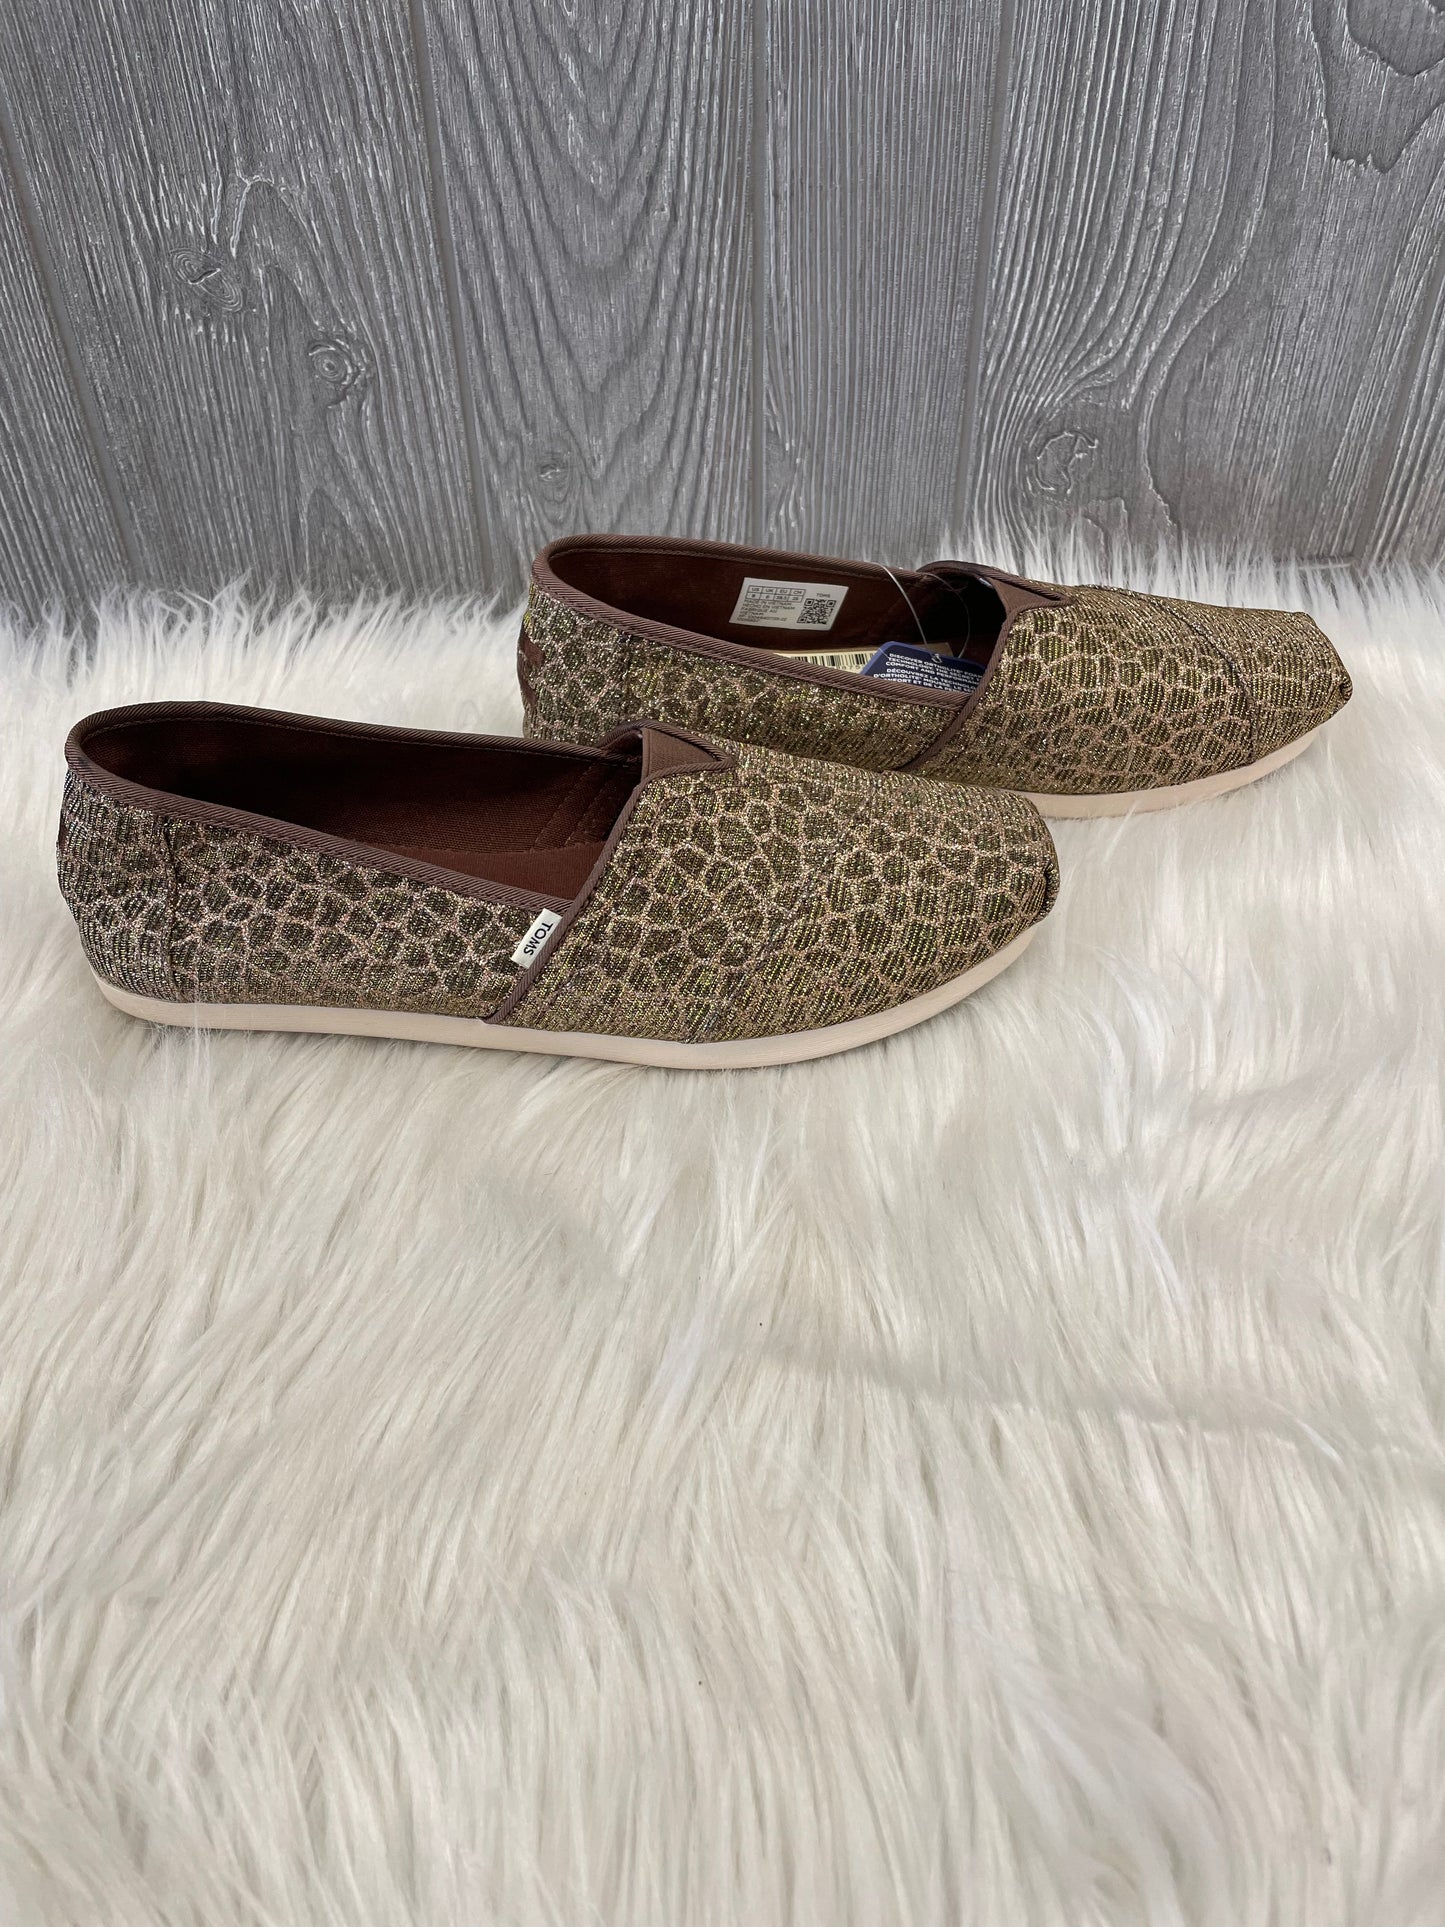 Animal Print Shoes Flats Toms, Size 8